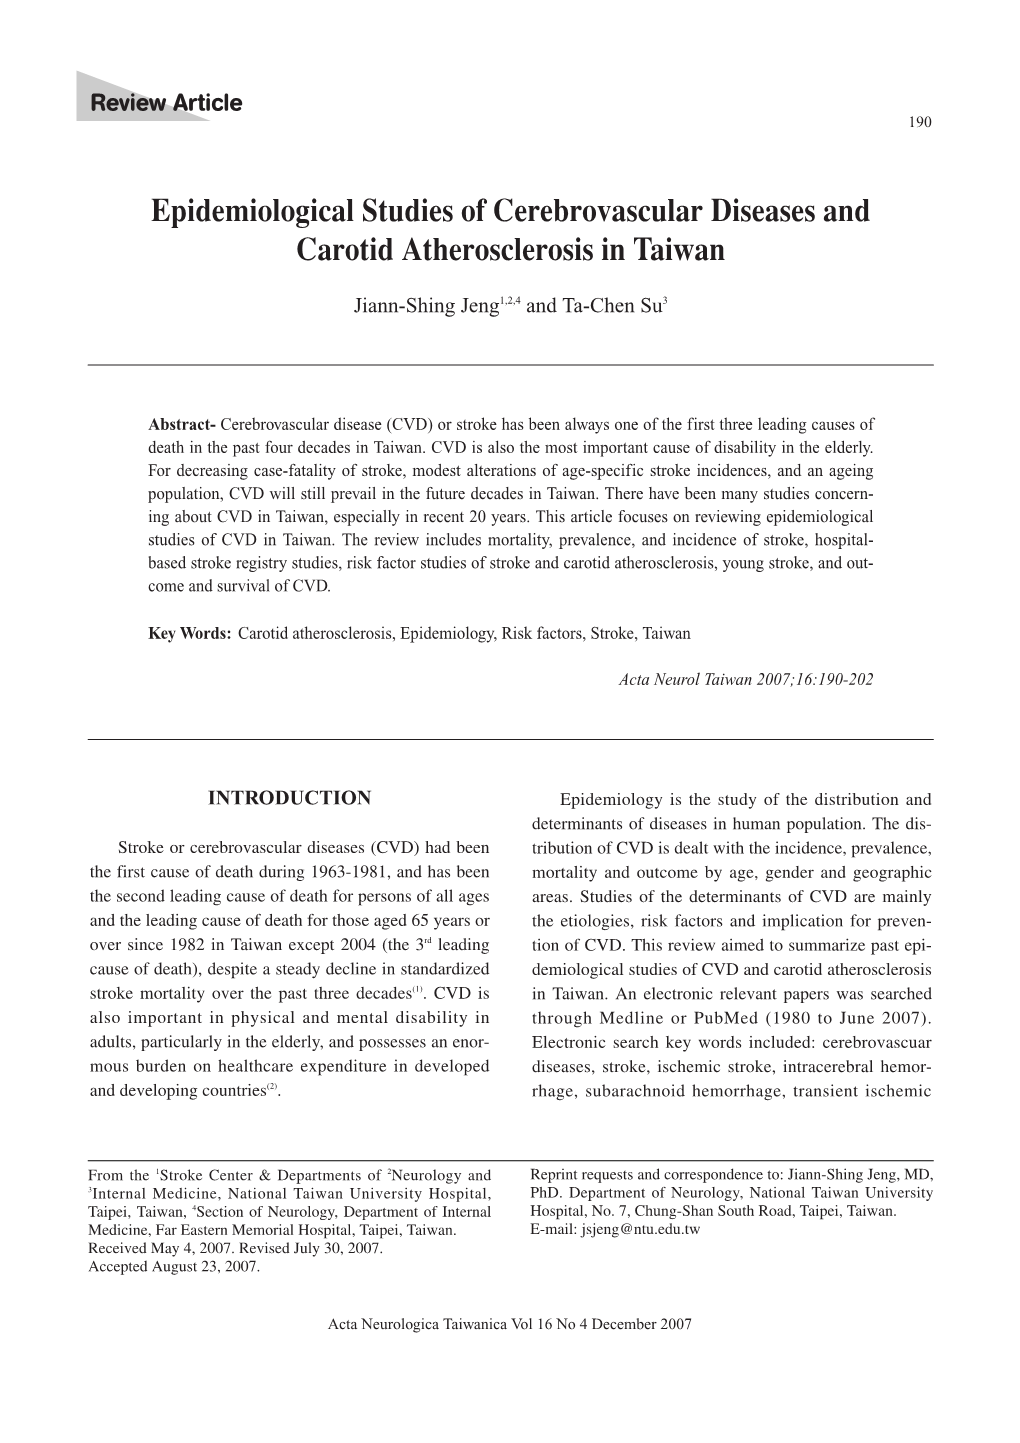 Epidemiological Studies of Cerebrovascular Diseases and Carotid Atherosclerosis in Taiwan